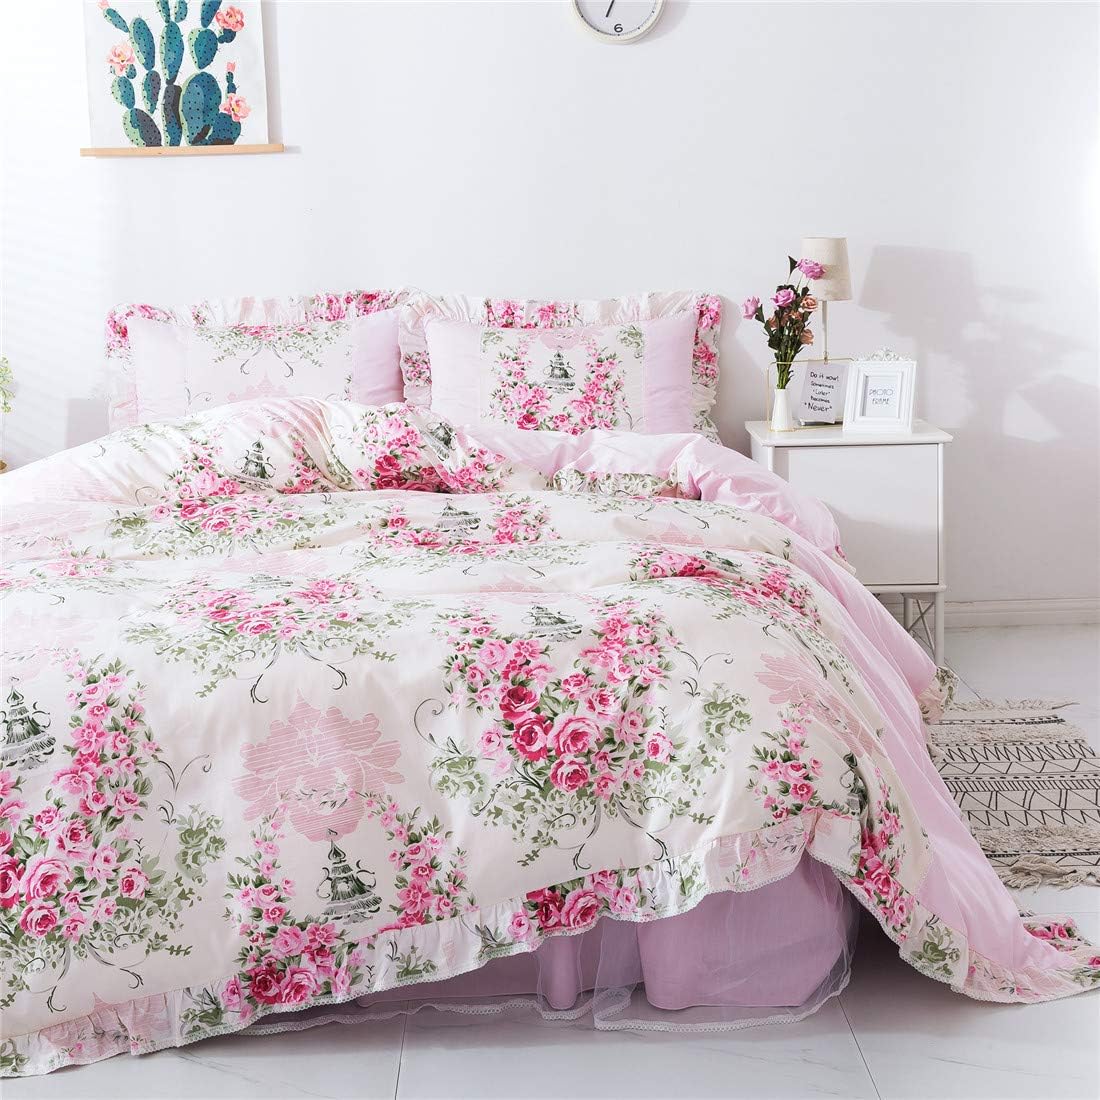 FADFAY Floral Bedskirt Set Lace Bedding Pink Duvet Cover Set Rose Printed 100% Cotton Queen House Bedding Sets for Girls Women (4-Piece, Queen, Pink)